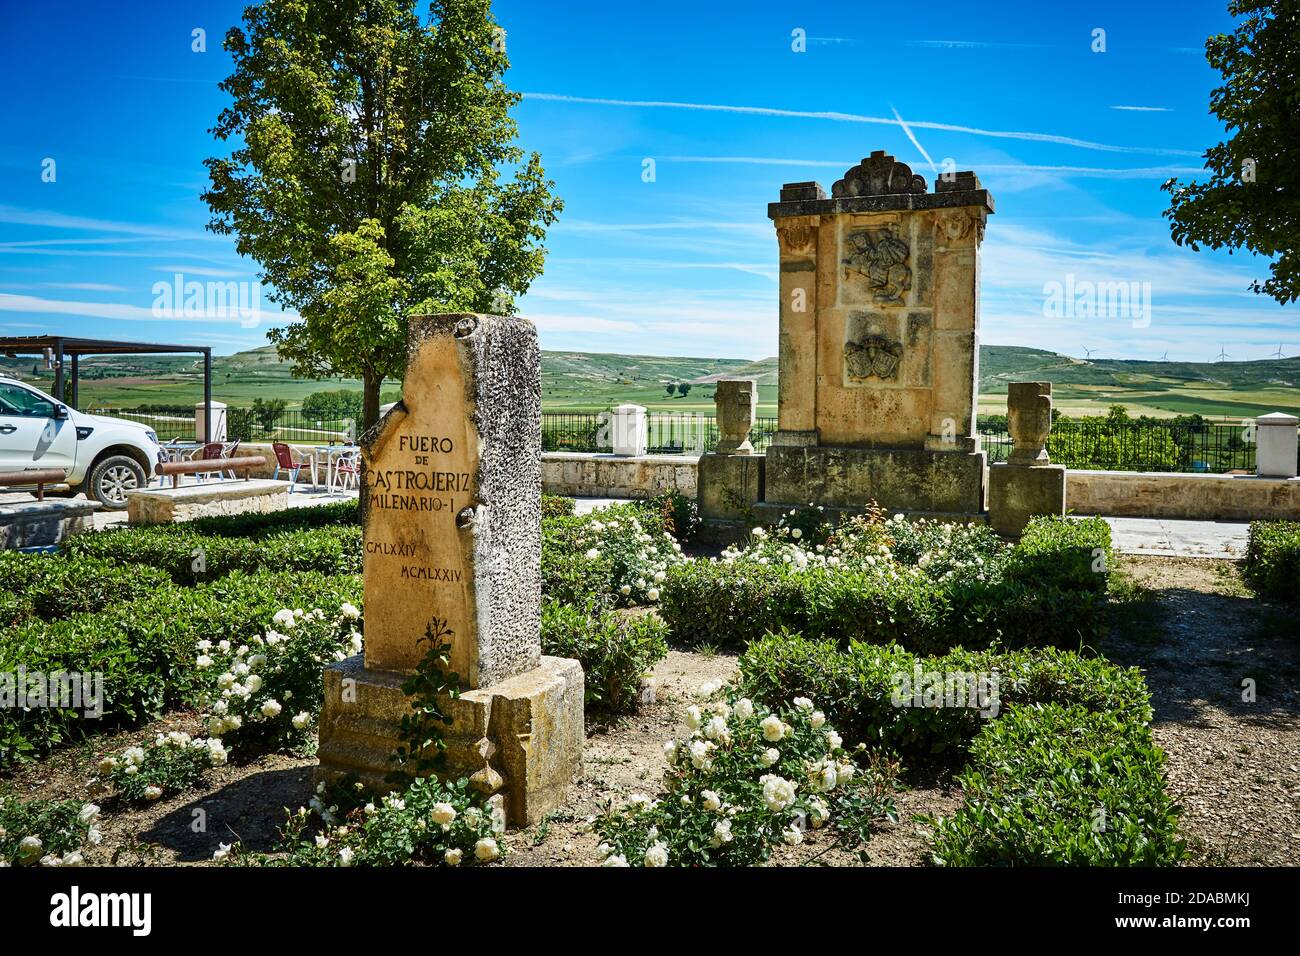 Monument to the Fuero de Castrojeriz. Stone monolith commemorating the  first millenary of the Fuero de Castrojeriz granted in 924 by Count Fernán  Gonz Stock Photo - Alamy